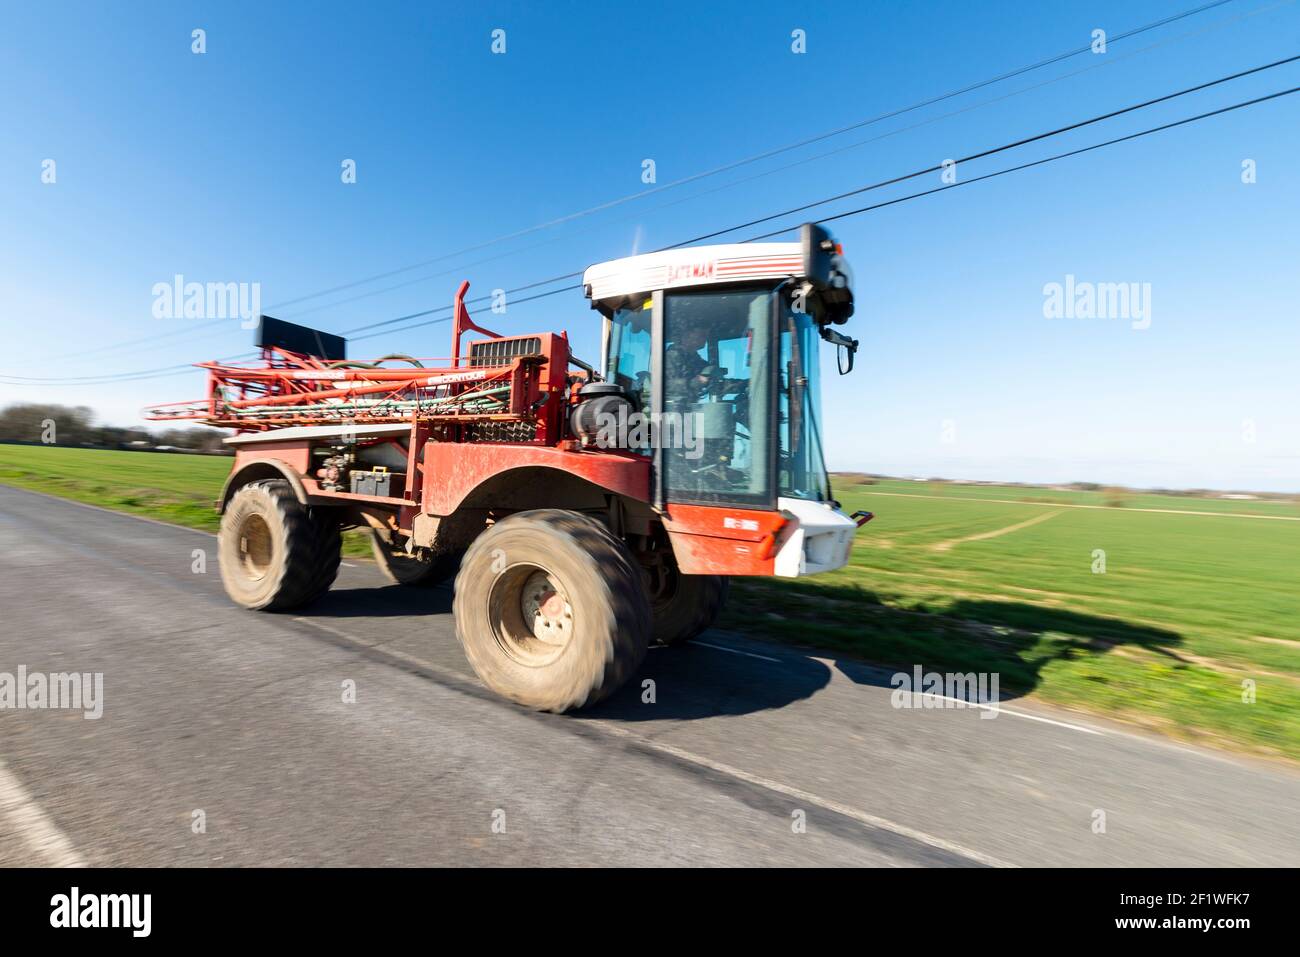 Bateman RB26 crop sprayer farm vehicle driving on Paglesham Road in the Essex coutryside, UK Stock Photo